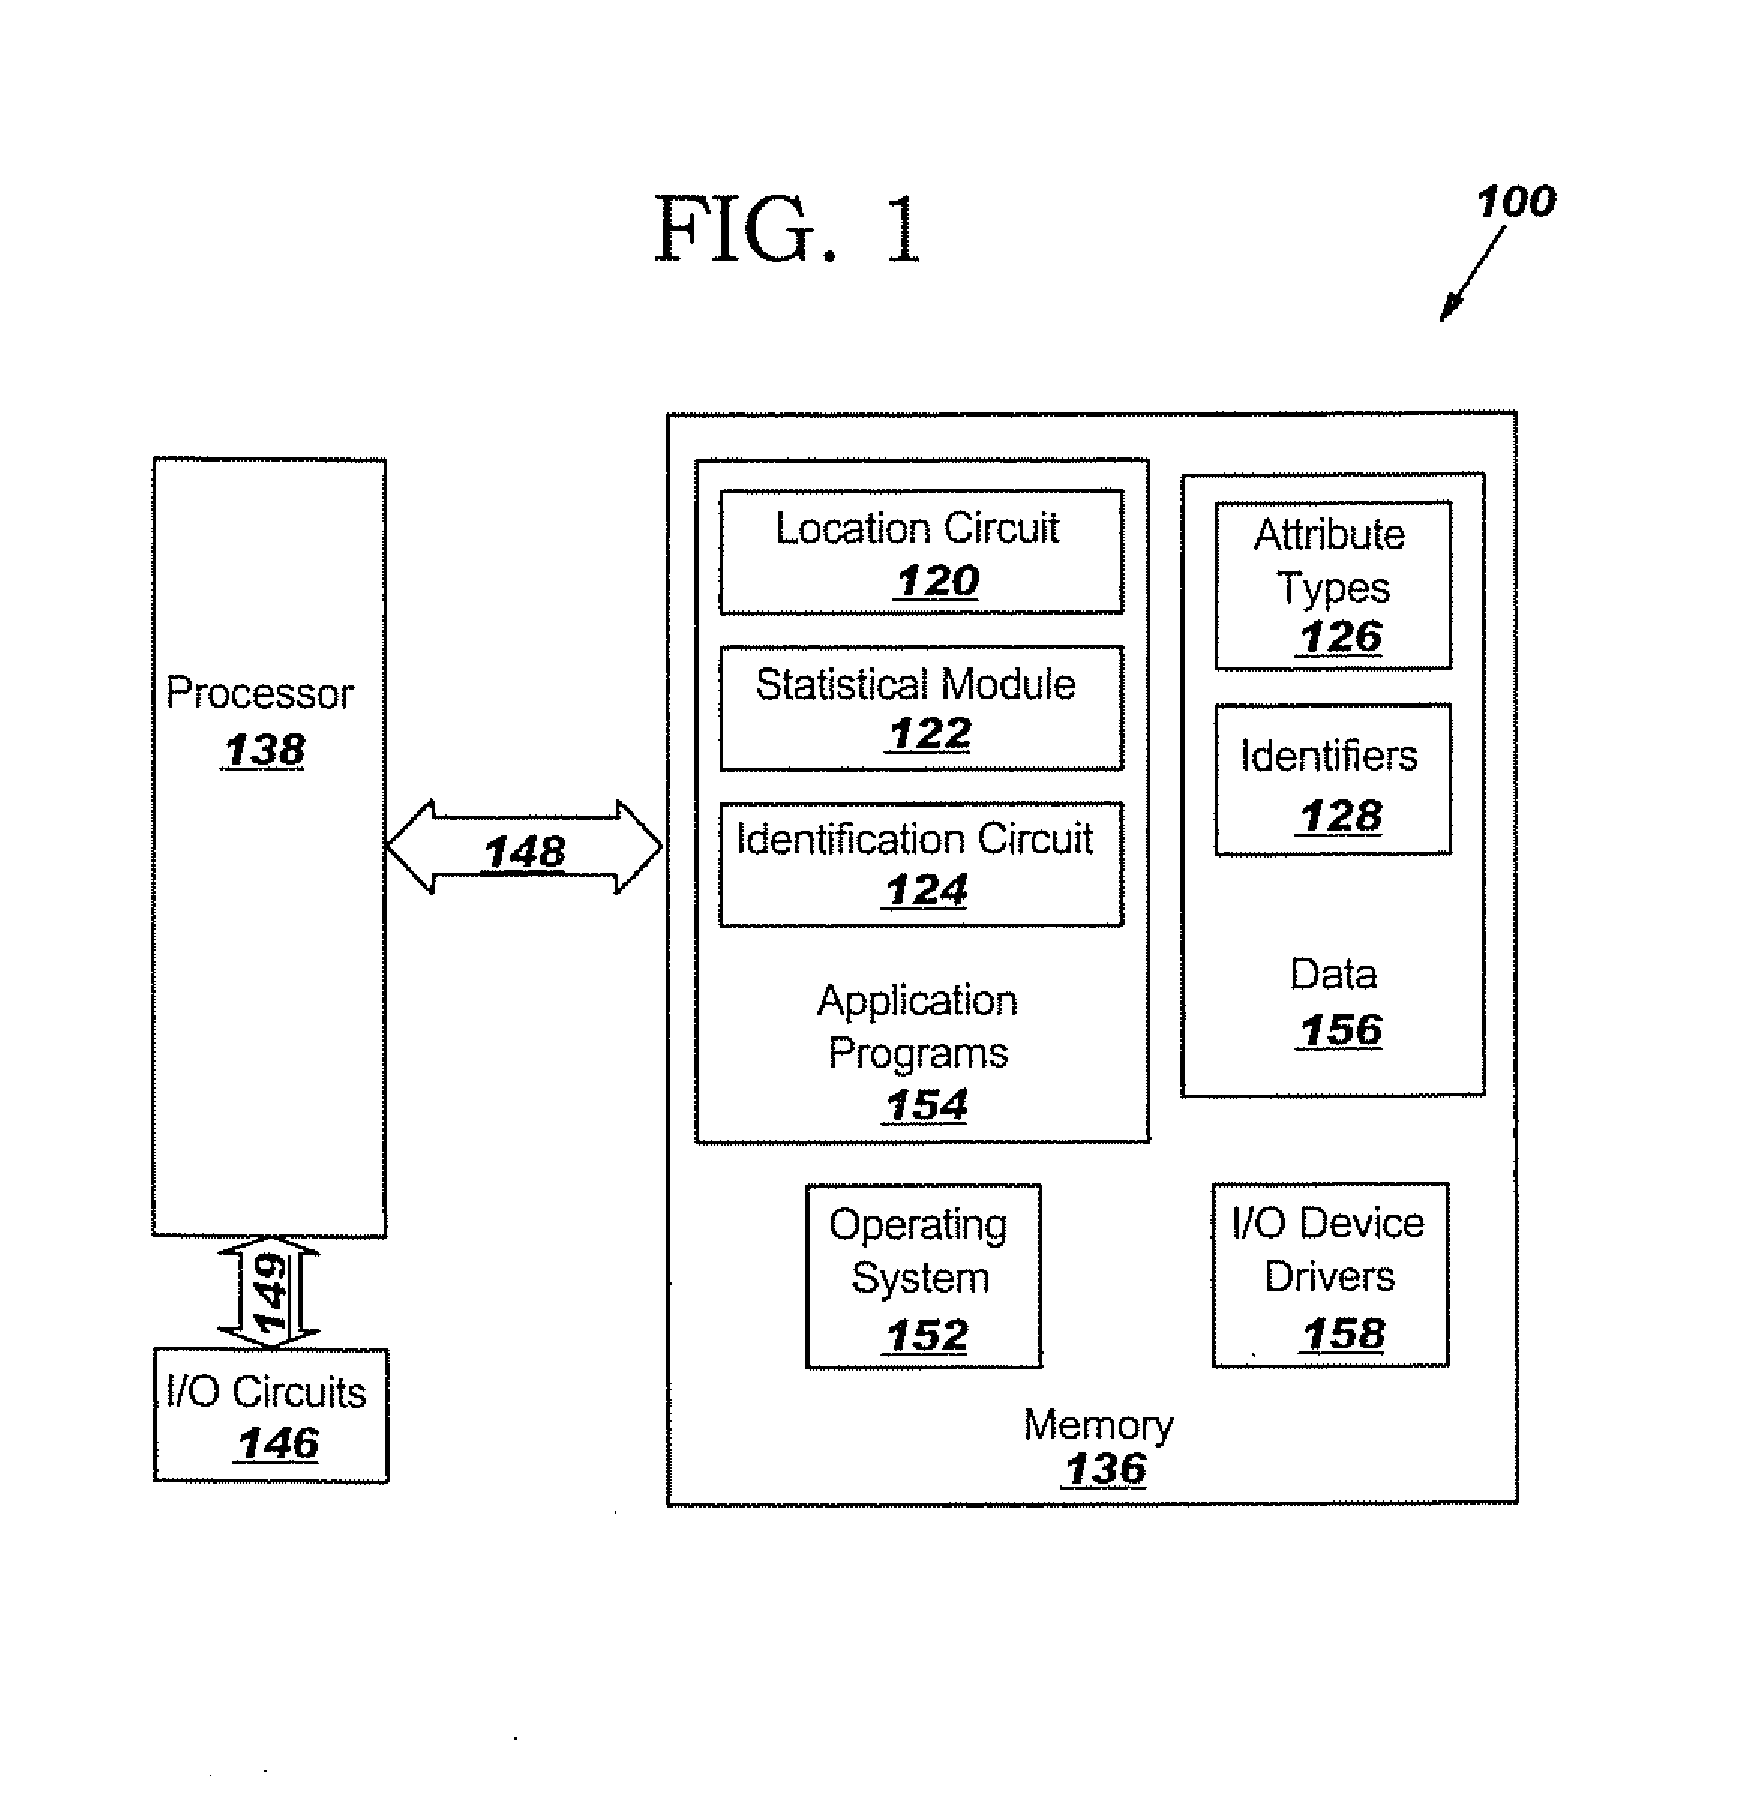 Methods for Associating Records in Healthcare Databases with Individuals